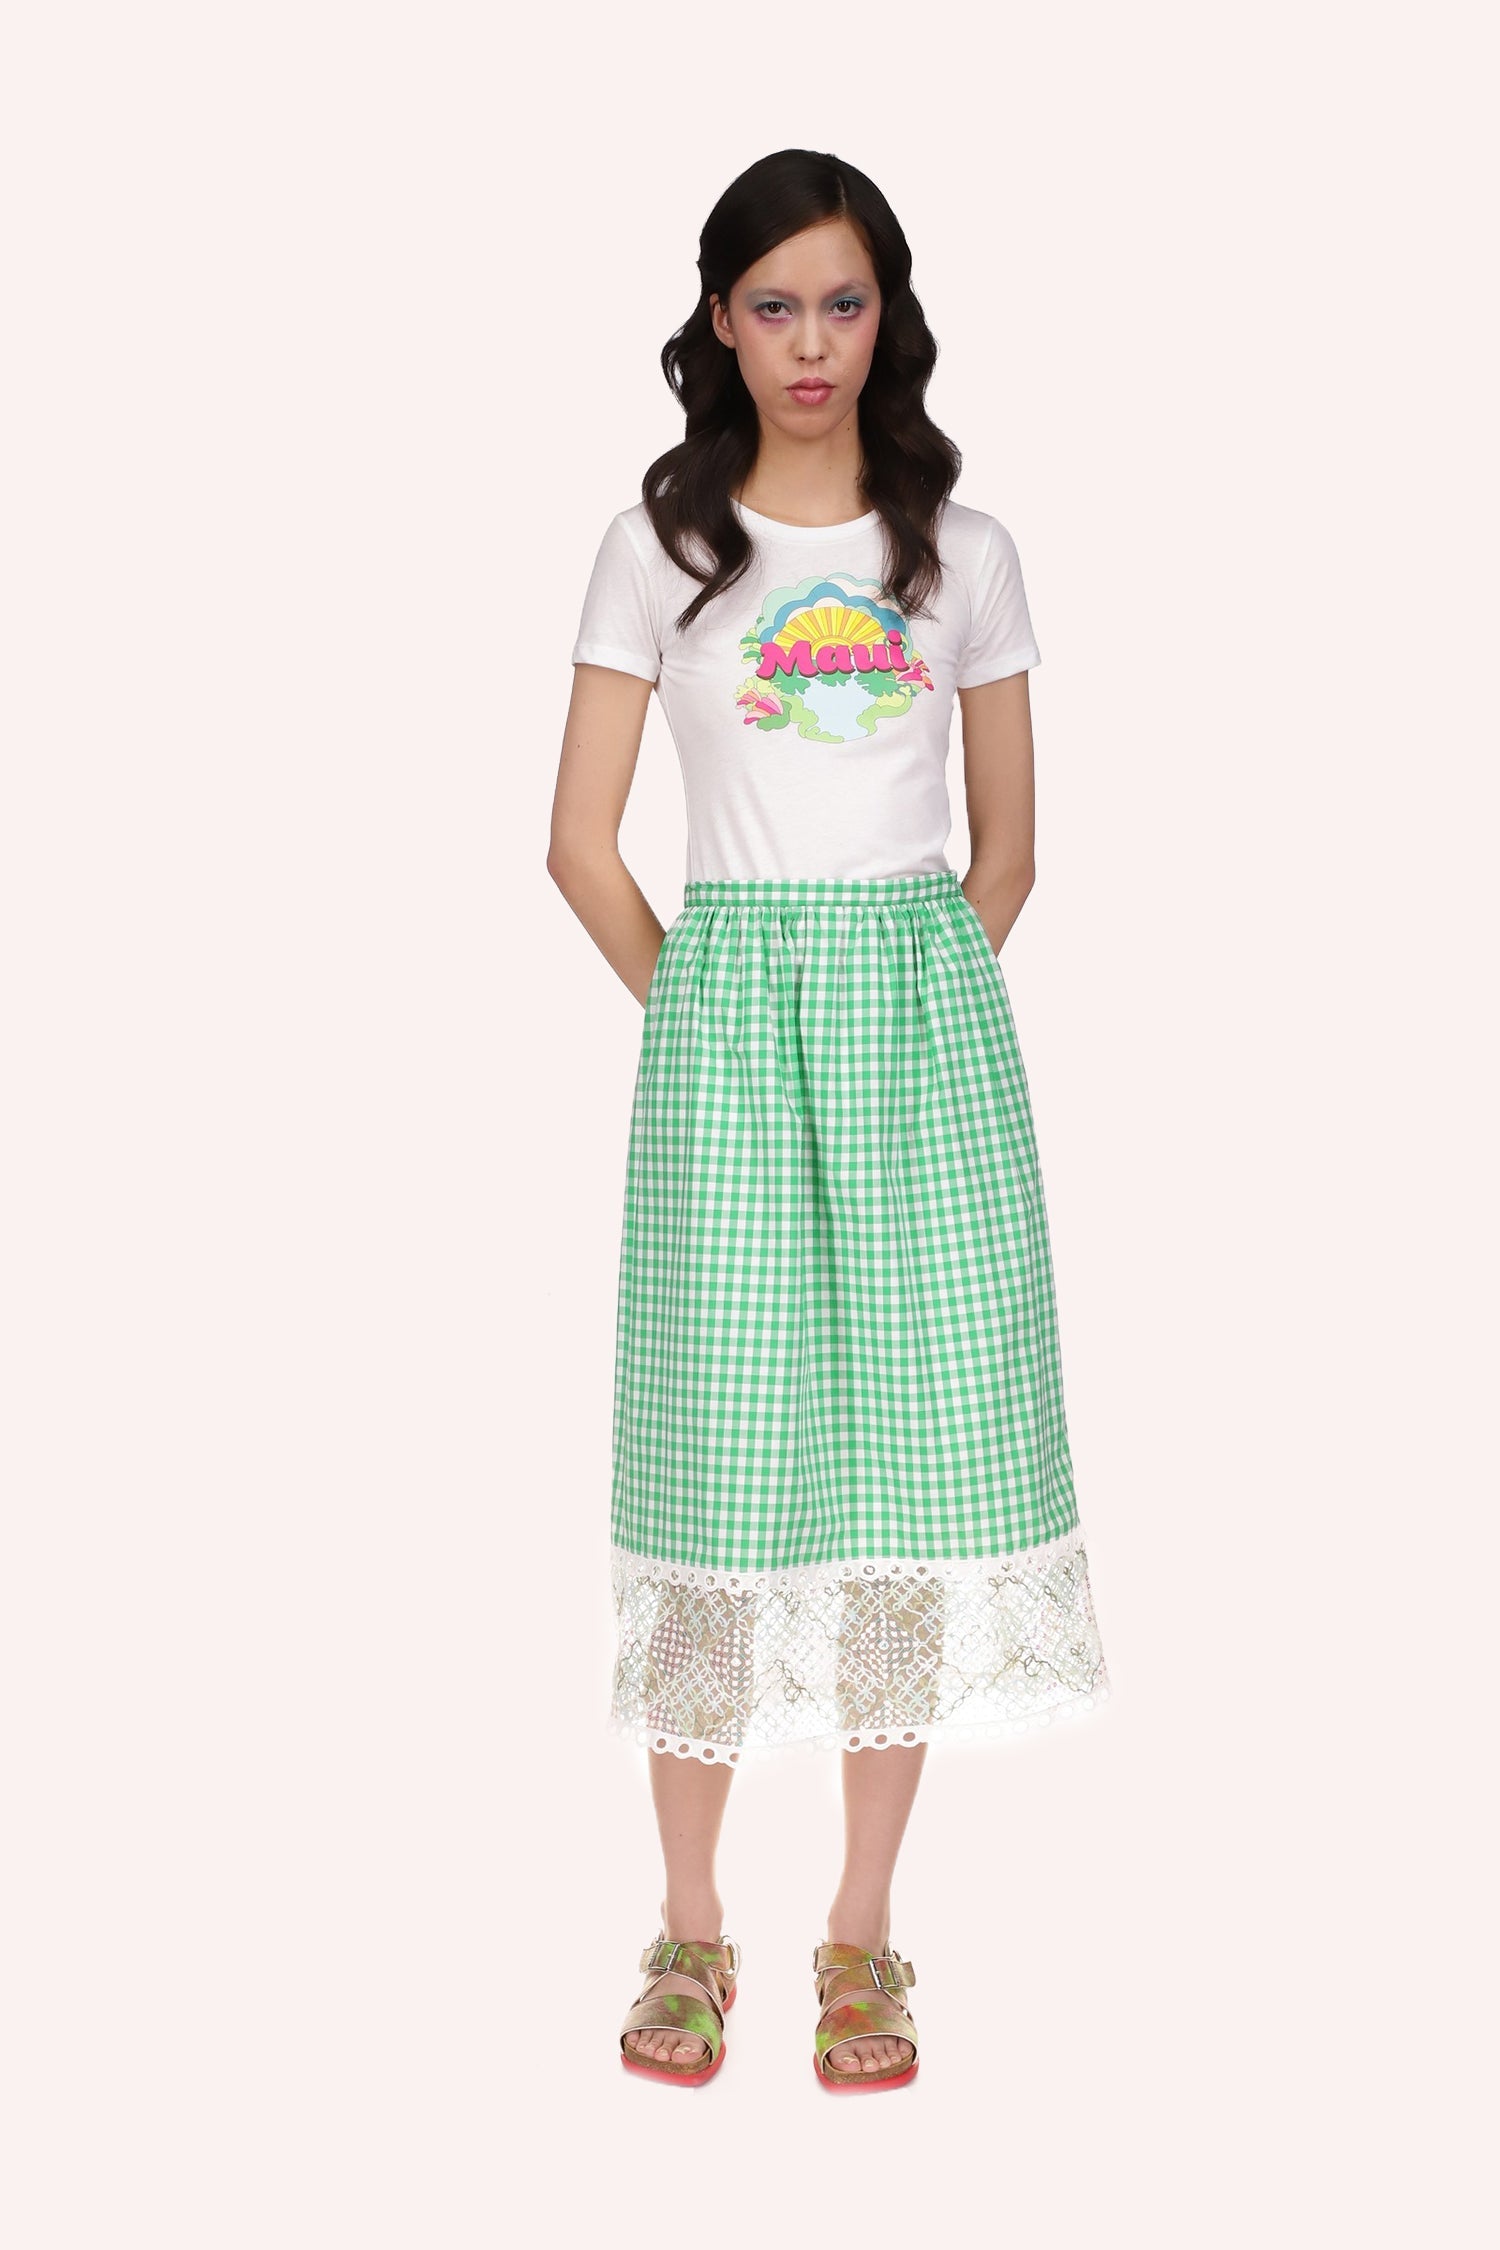 Gingham Skirt white and green, large see-thru lace at bottom with a darker lace border